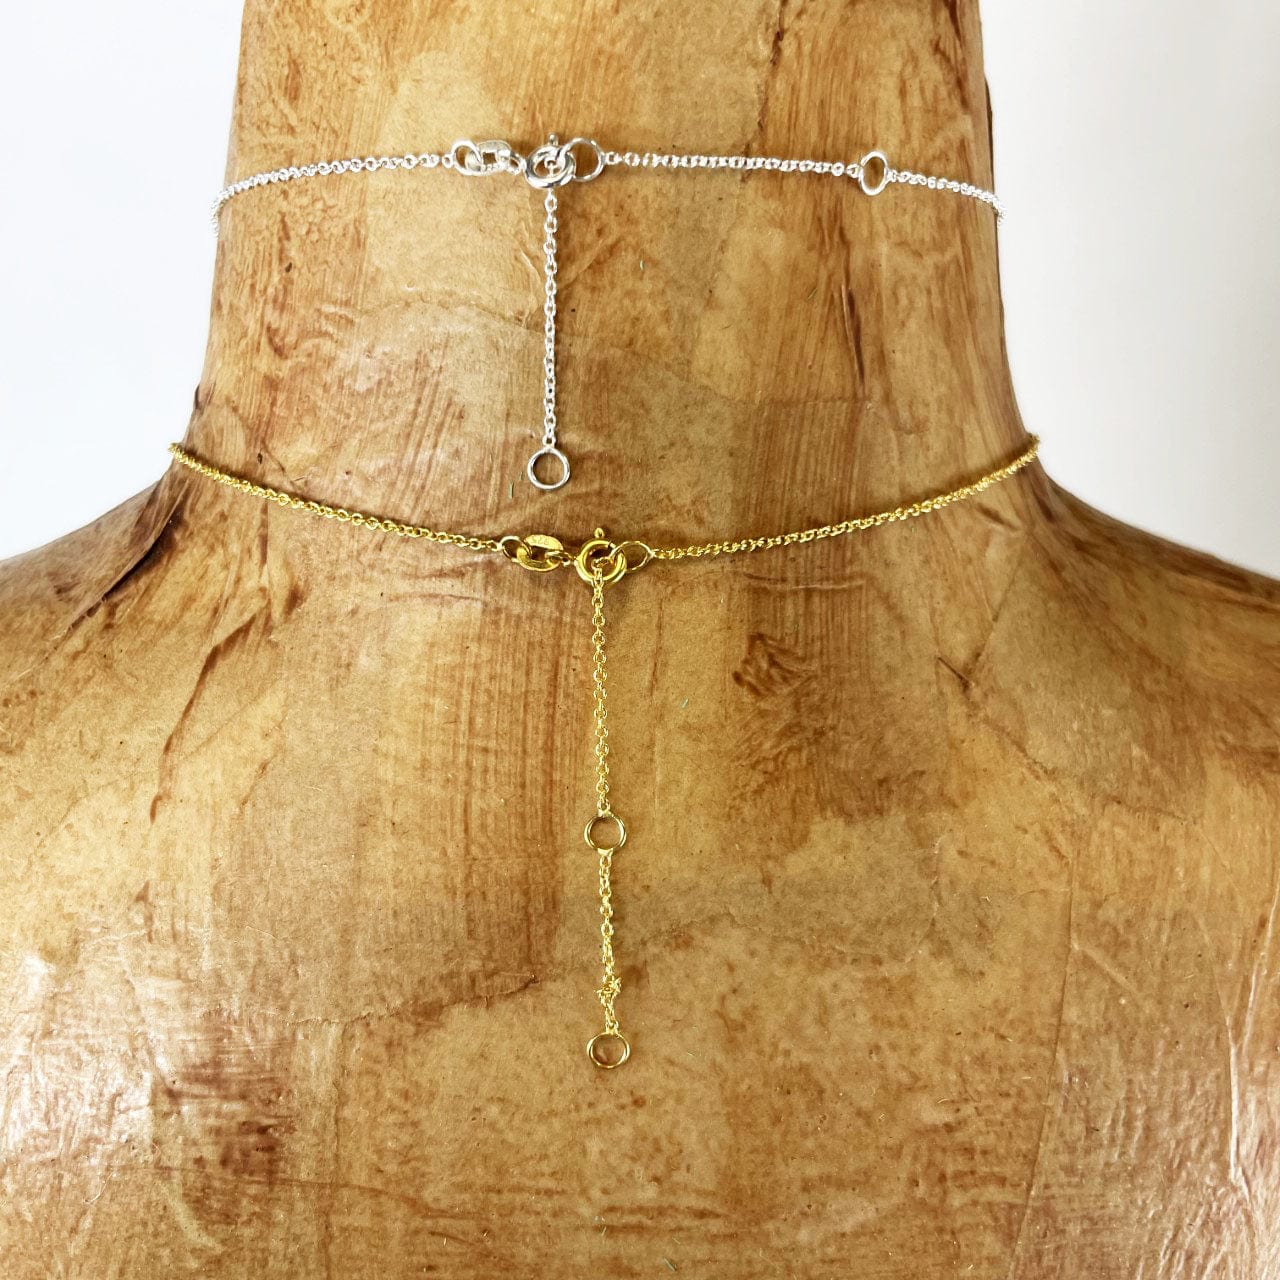 back of necklace showing clasp closure